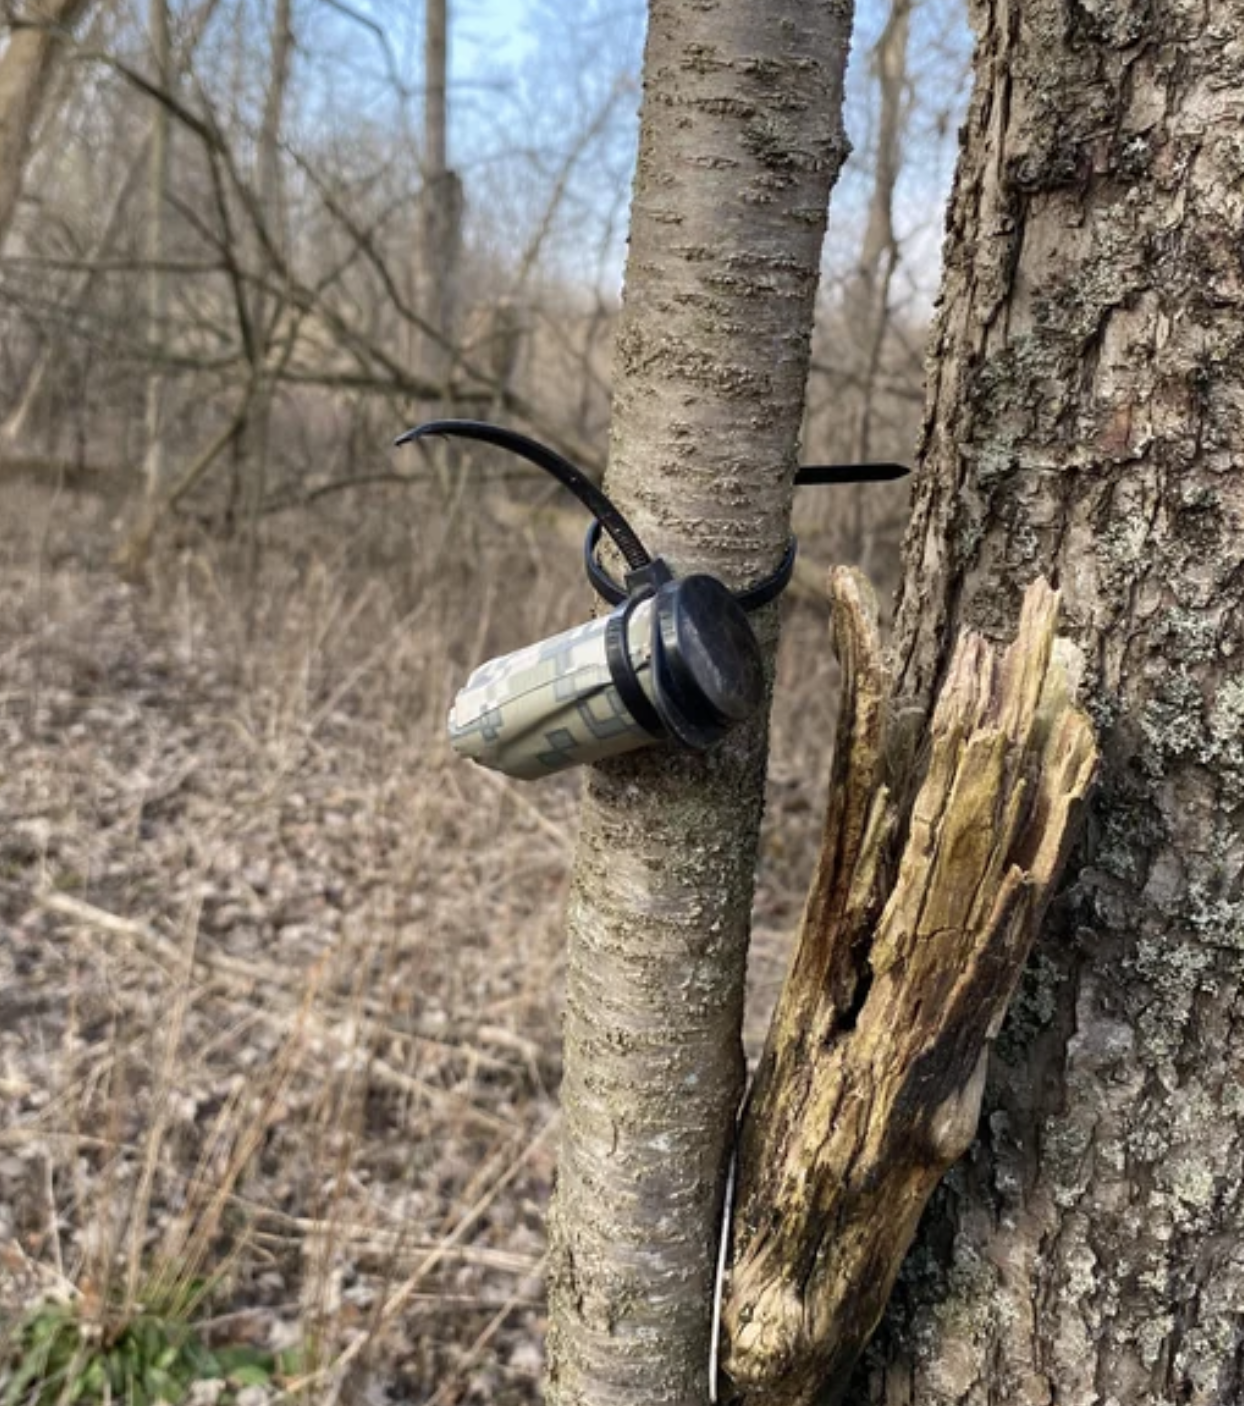 A geocache container is attached to a tree trunk in a wooded area